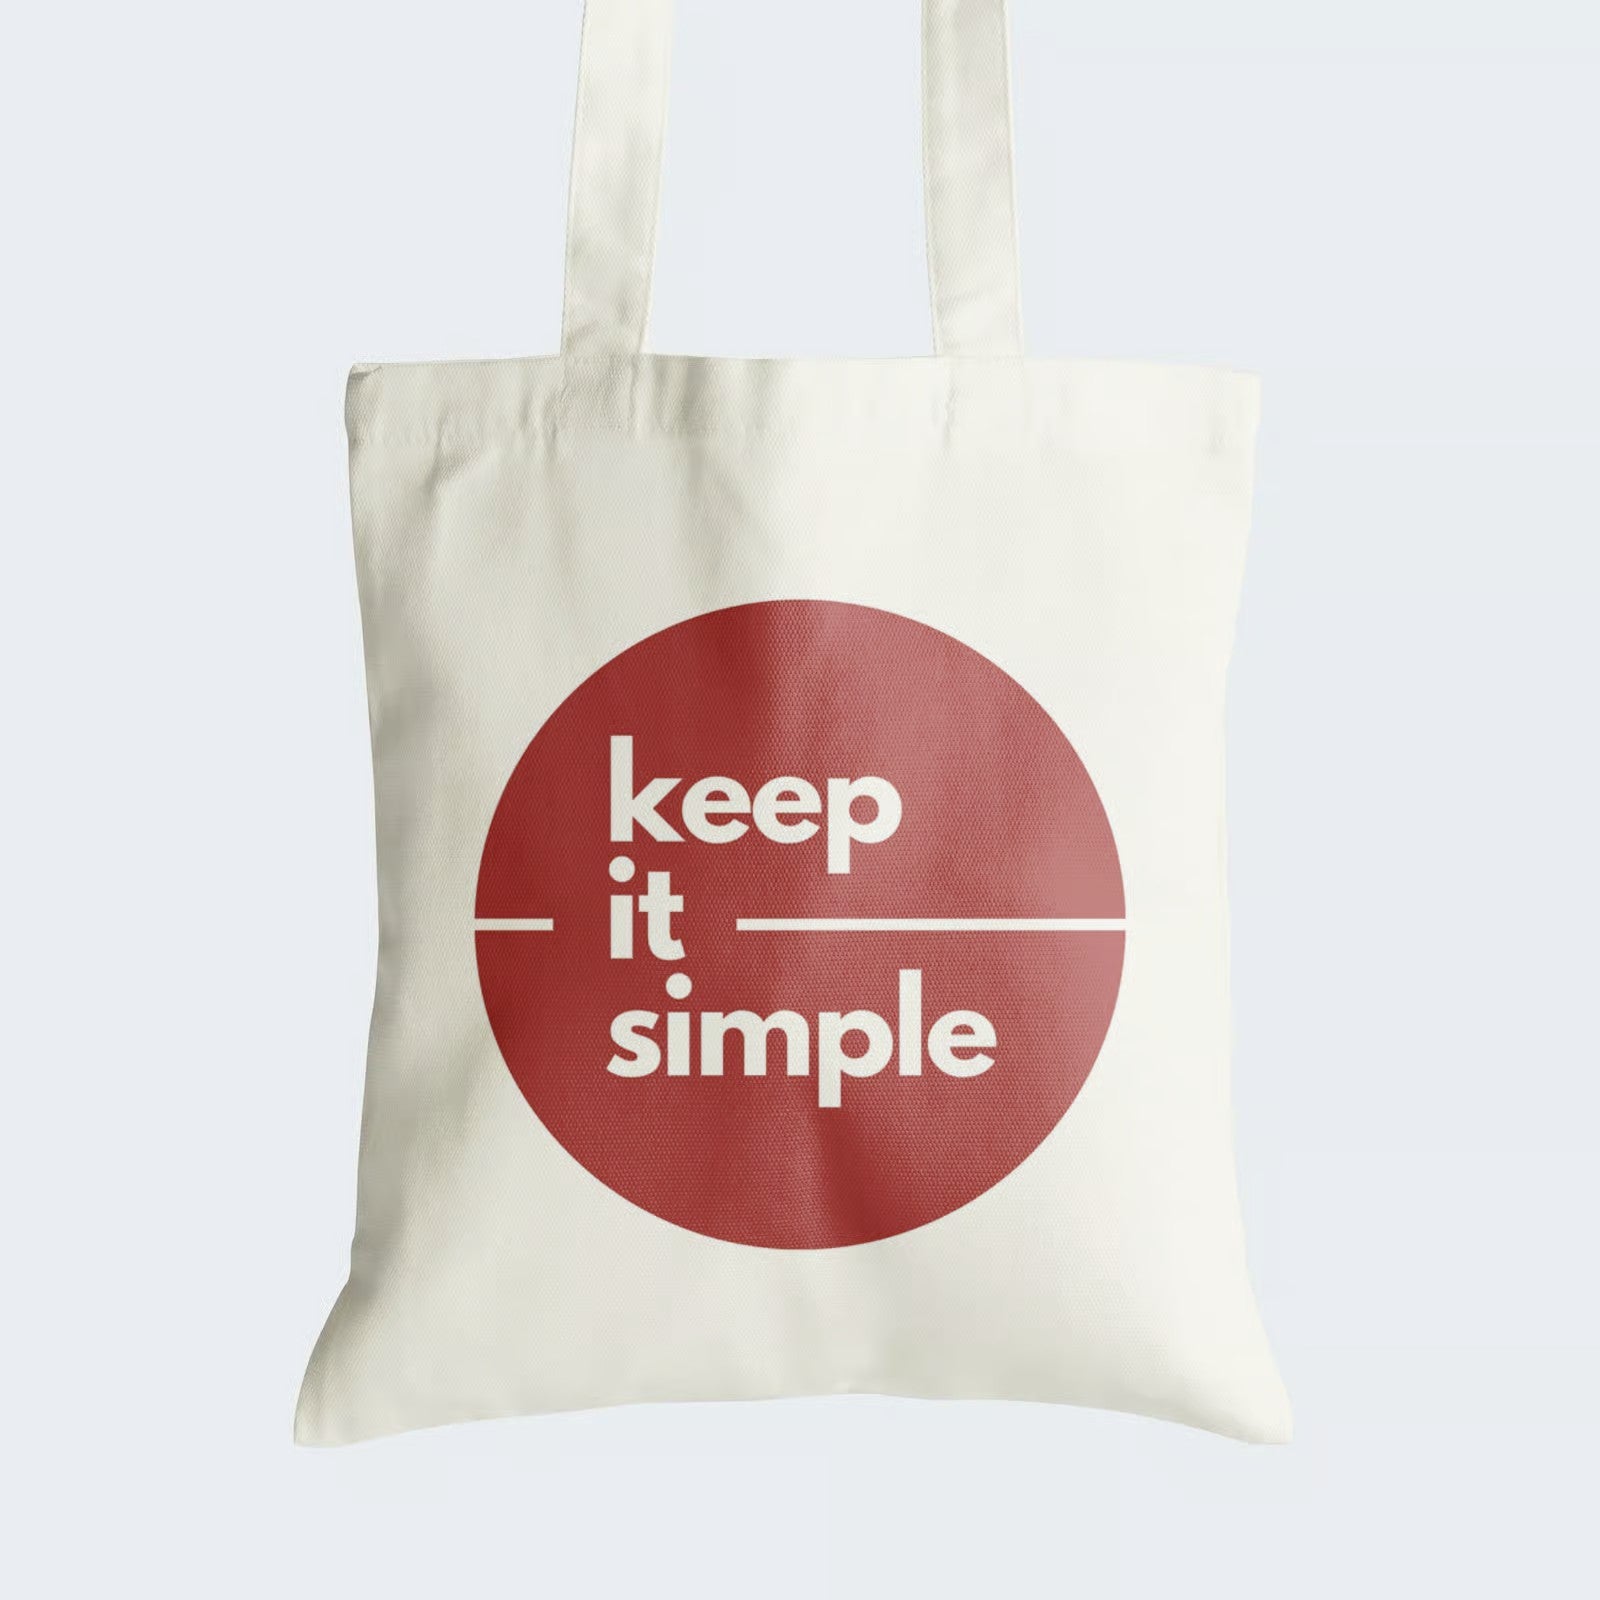 Elevate your style with our Cotton Canvas Tote Bag, featuring a maroon circle housing the timeless message "Keep it Simple." Crafted for both durability and elegance, this tote boasts a secure zipper closure for everyday convenience. By choosing this reusable bag, you embrace the beauty of simplicity while making a fashionable statement. Elevate your accessory collection with our "Keep it Simple" Cotton Canvas Tote Bag - order now to carry simplicity in style!